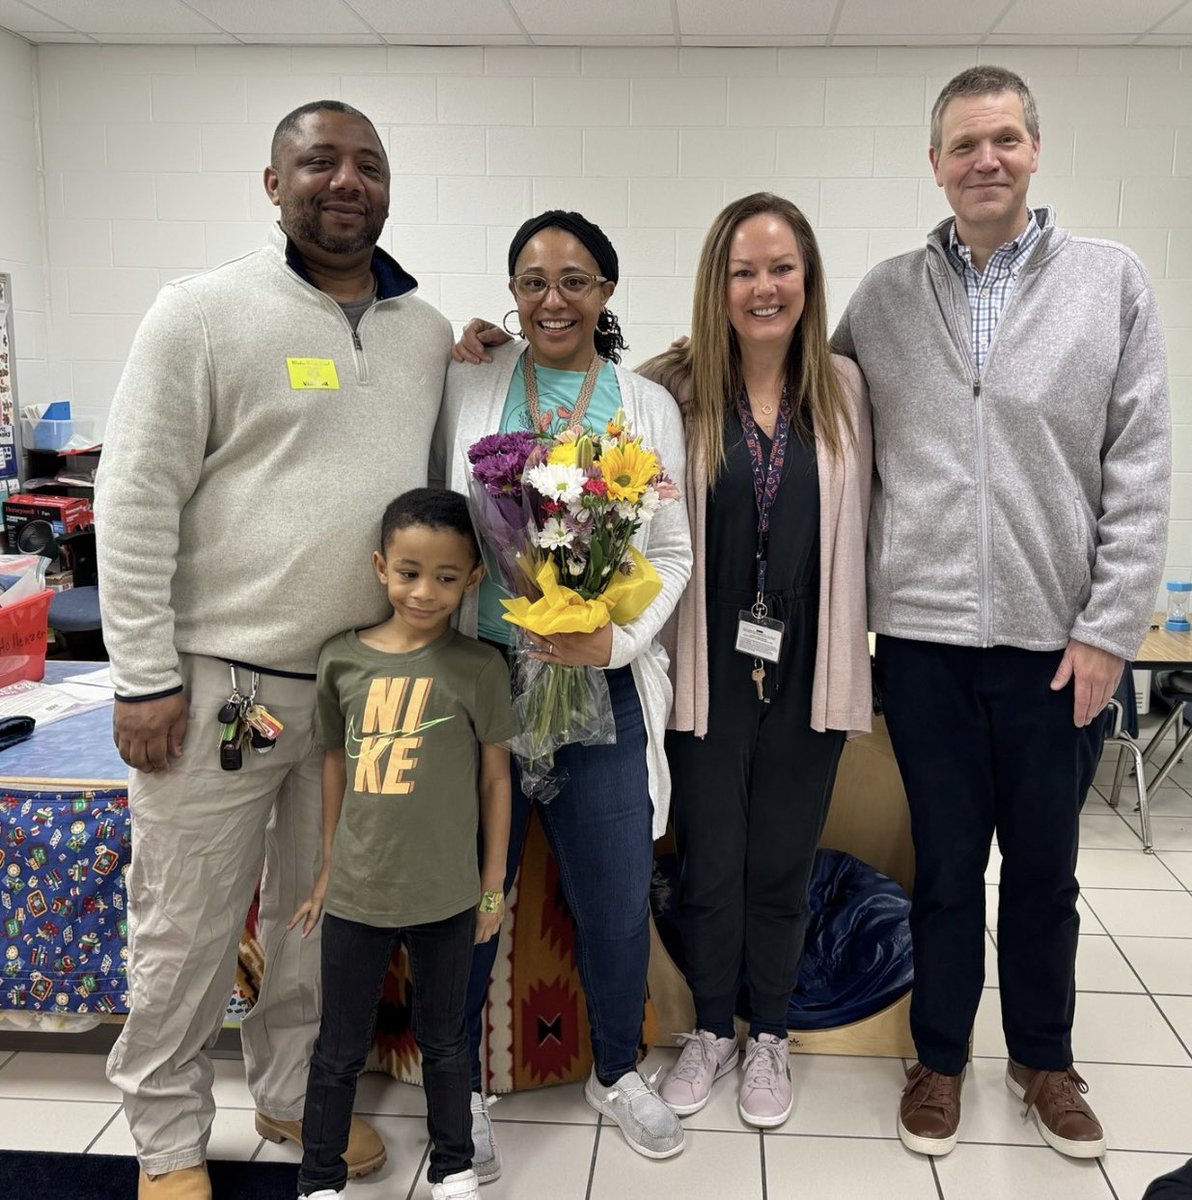 Thrilled to award Alexis Nickles with Teacher Assistant of the Year! She has been filling in as an ECSE teacher for most of the year and we are blessed to have her at Windsor Woods! @vbkimani @vbcpsdtal @vbcpsopec @WIndsorWoodsES @vbschools @LeadVBCPS